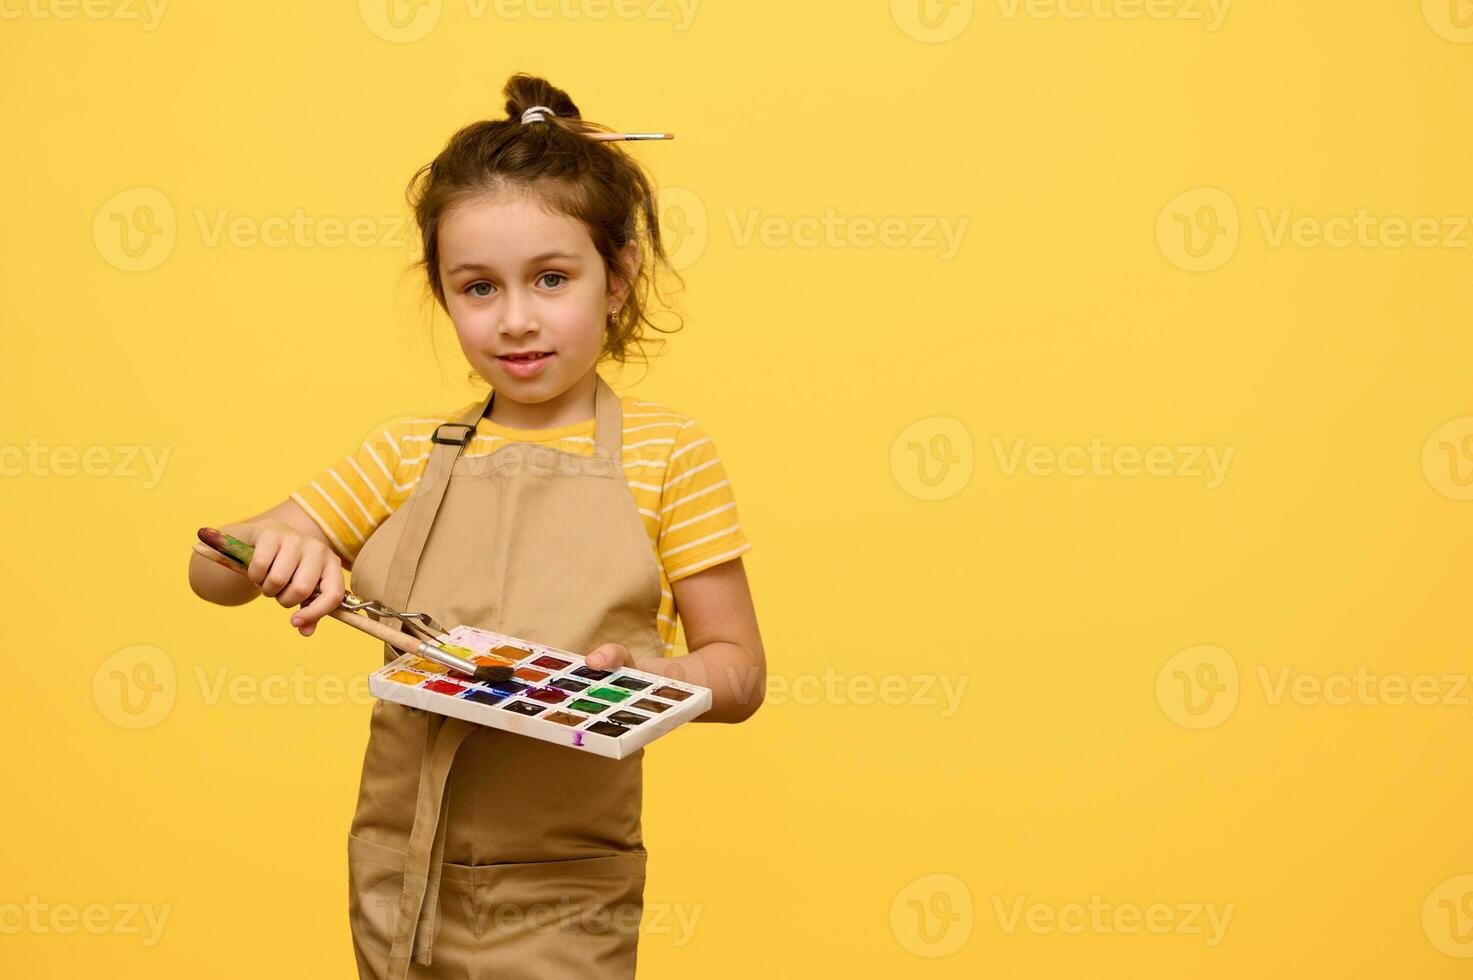 Talented little girl painter artist in apron with paintbrush in hairstyle, holds watercolor palette and painting tools photo